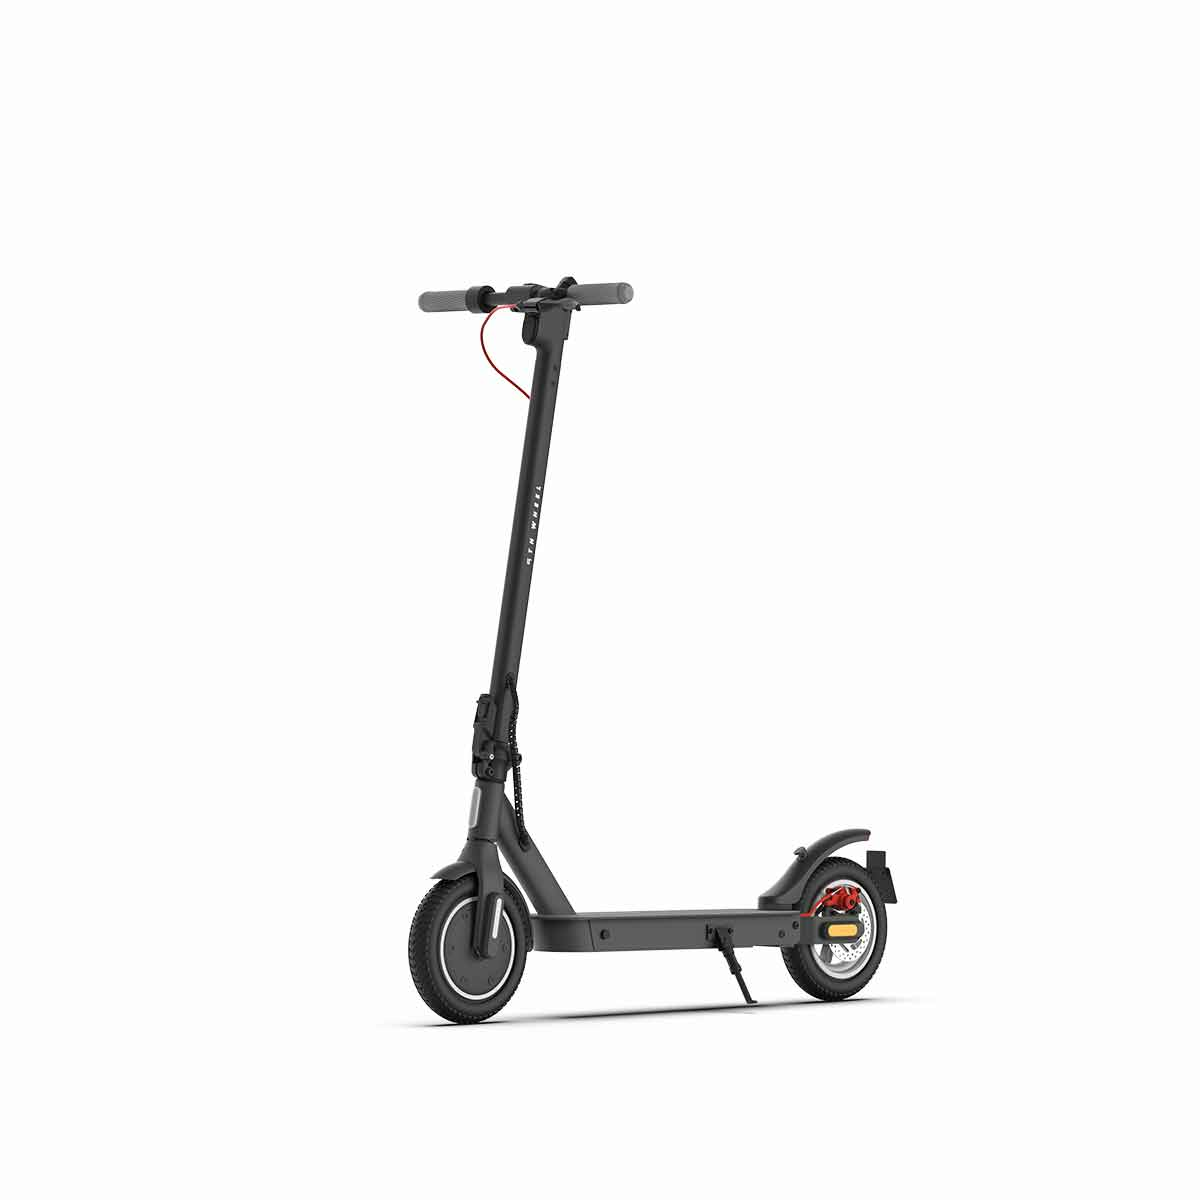 best price,5th,wheel,v30proes09,36v,7.5ah,350w,inch,electric,scooter,eu,discount